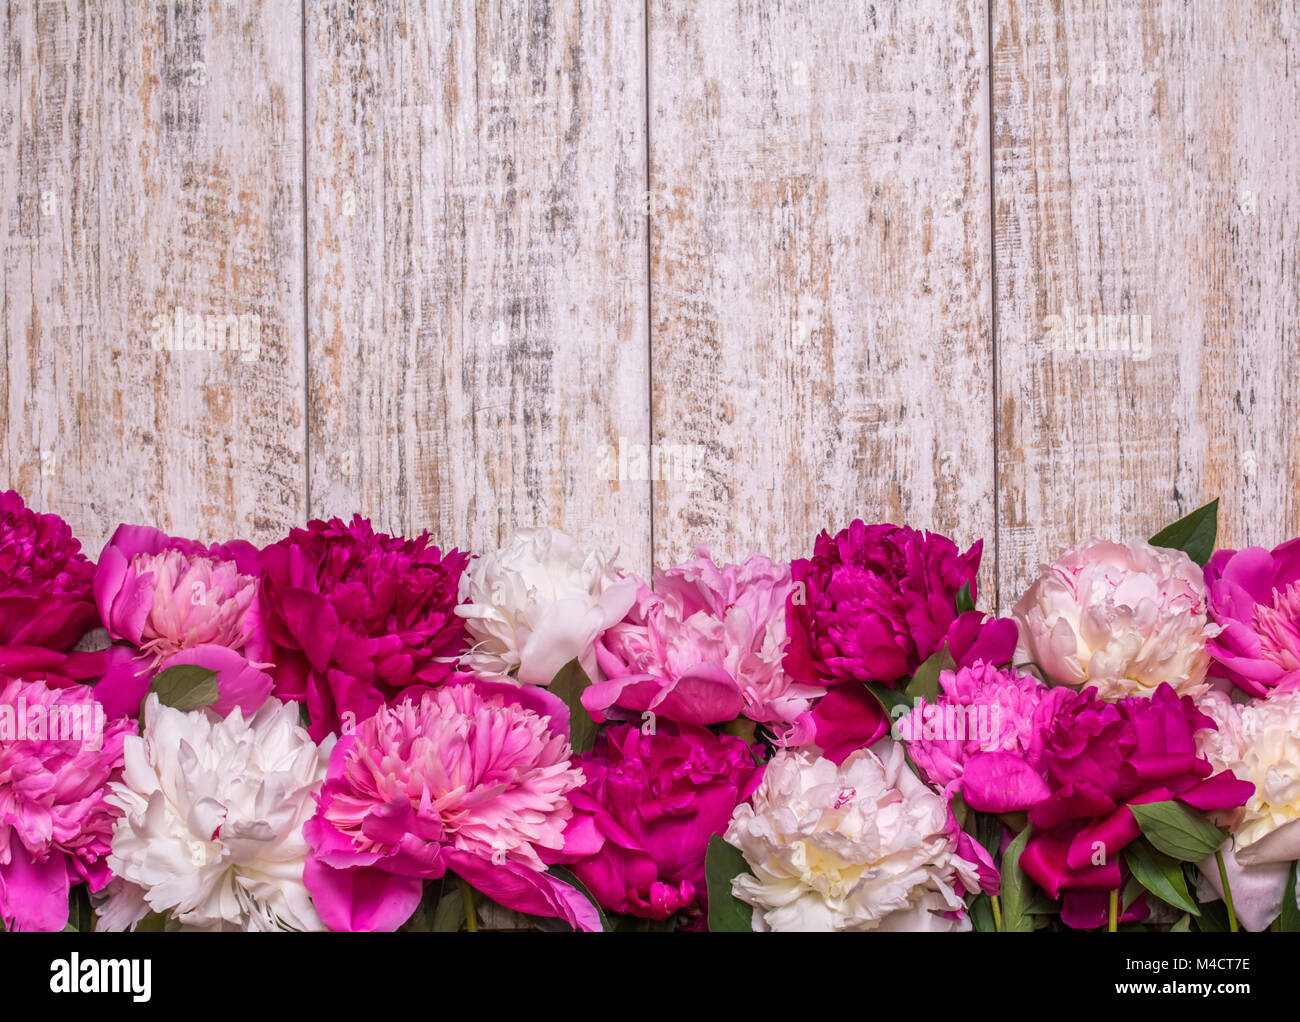 Border of peonies on a wooden background with empty space for text. Floral design. Pink and purple spring flowers. View from above, flat lay, top view Stock Photo